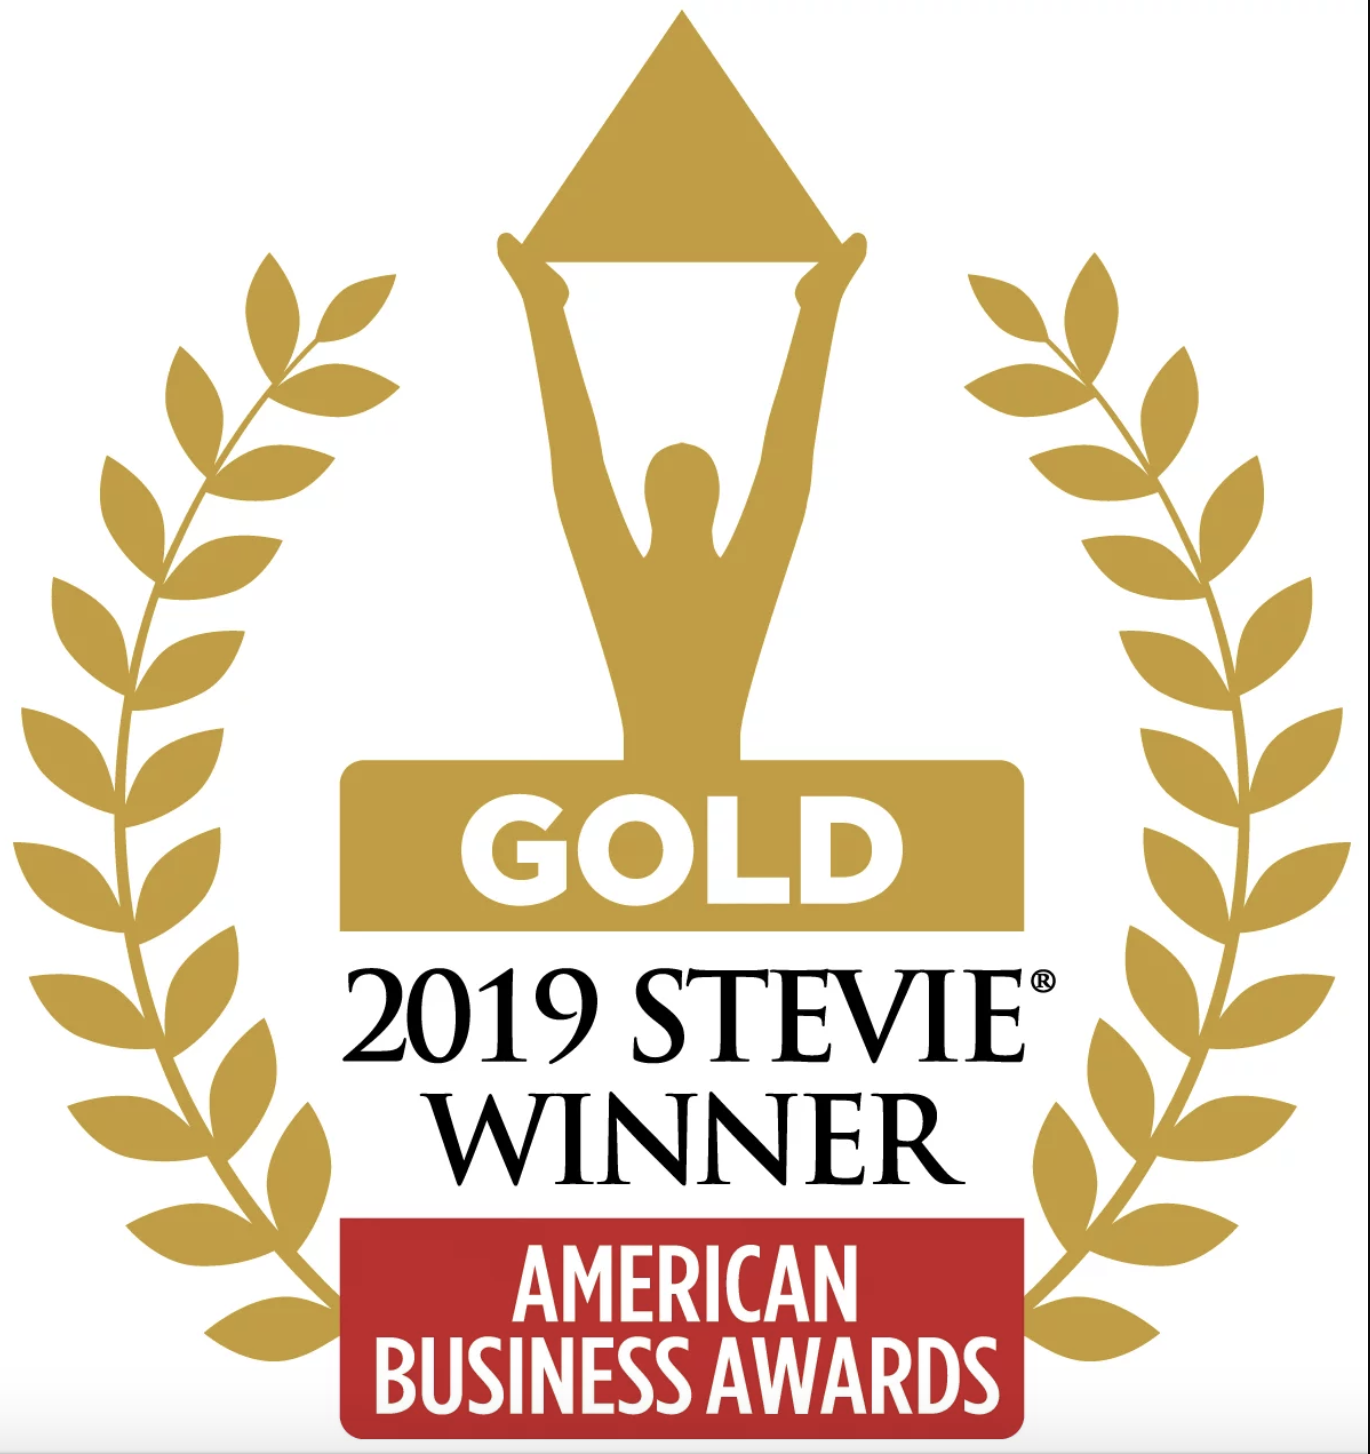 Easyship Wins Gold Stevie Award in the 2019 American Business Awards®